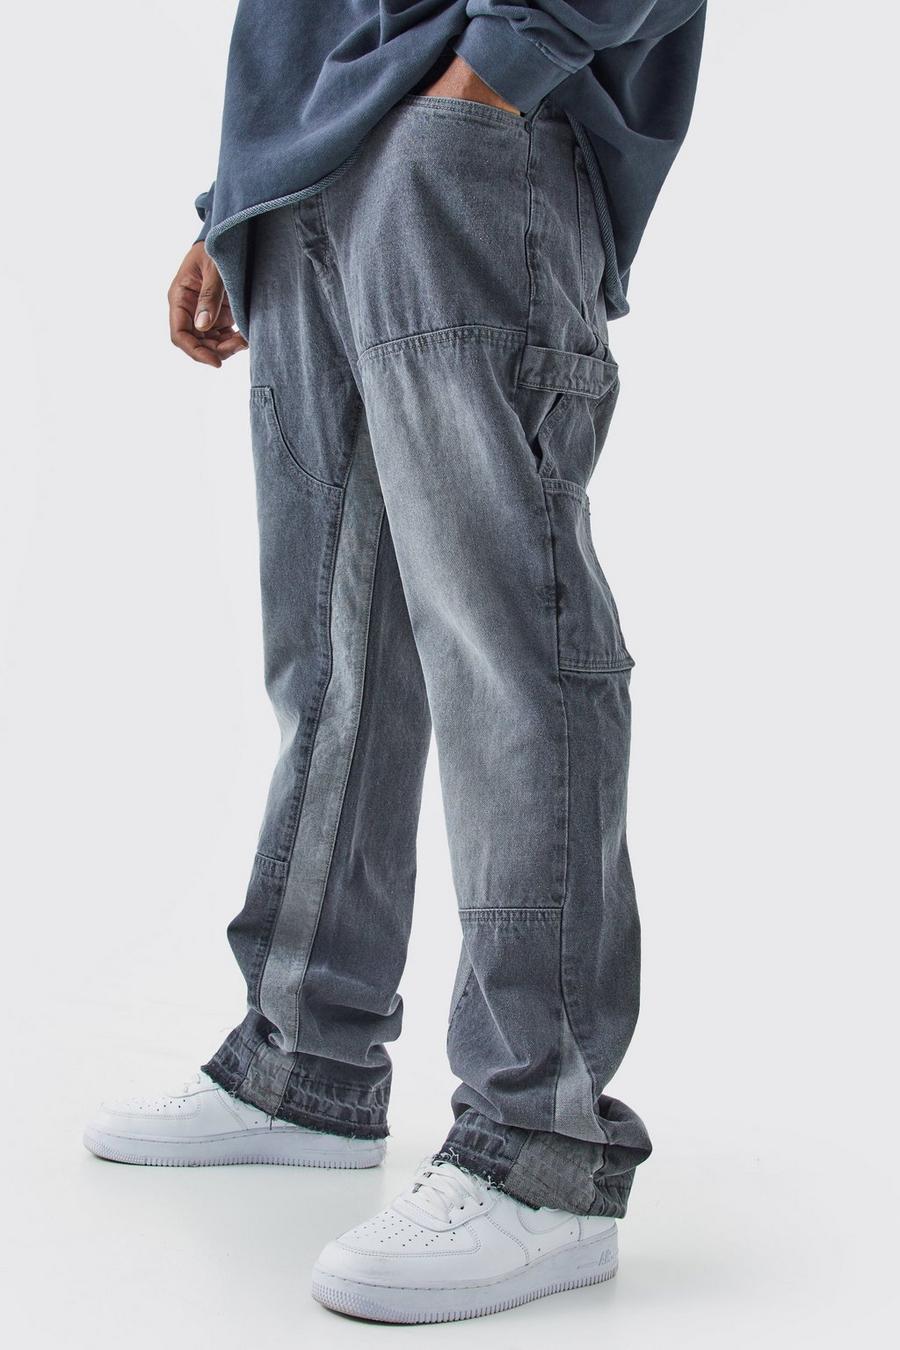 Grey Mid-rise woven pants boasts a full-length wide leg with straight